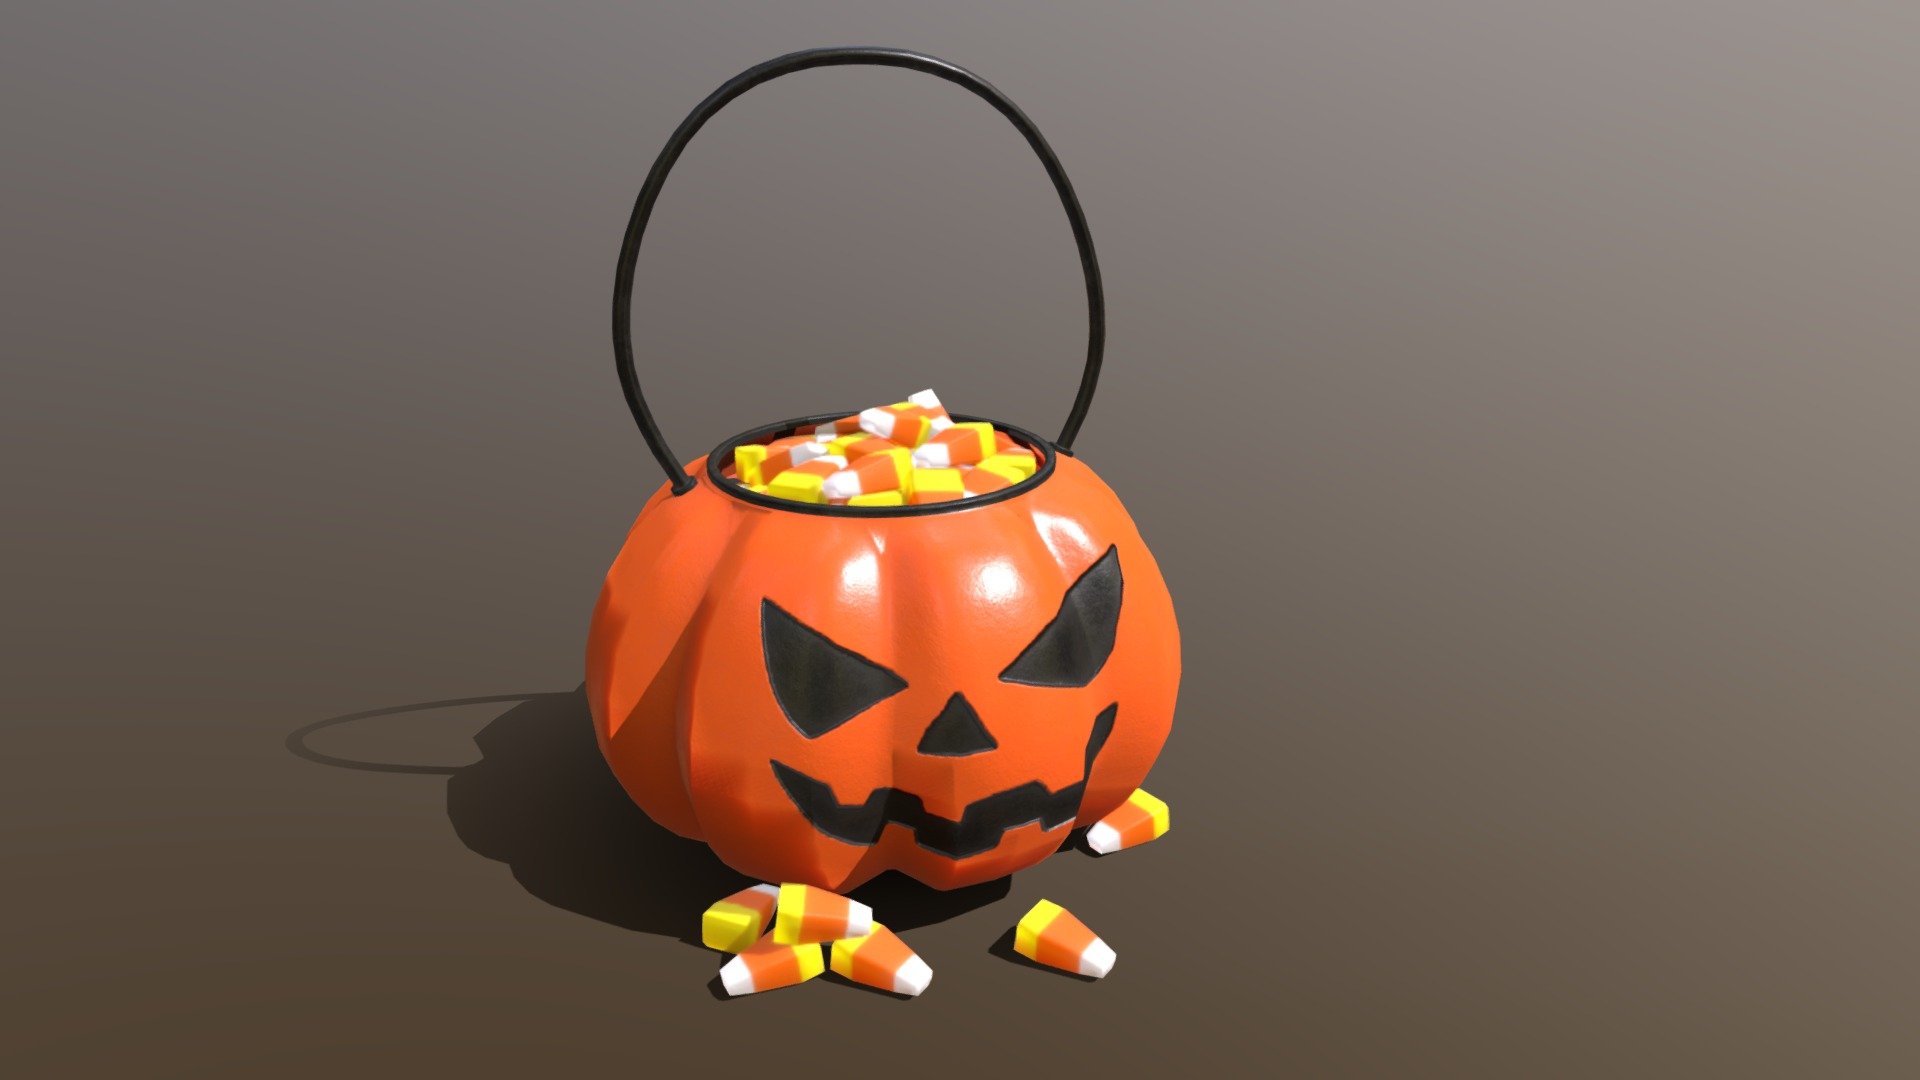 Halloween Plastic Pumpkin Candy Pail3D Model. This model contains the Halloween Plastic Pumpkin Candy Pail itself 

All modeled in Maya, textured with Substance Painter.

The model was built to scale and is UV unwrapped properly. Contains a 4K and 2K texture set.  

⦁   4995 tris. 

⦁   Contains: .FBX .OBJ and .DAE

⦁   Model has clean topology. No Ngons.

⦁   Built to scale

⦁   Unwrapped UV Map

⦁   4K Texture set

⦁   High quality details

⦁   Based on real life references

⦁   Renders done in Marmoset Toolbag

Polycount: 

Verts 2648

Edges 5108

Faces 2564

Tris 4995 

If you have any questions please feel free to ask me 3d model